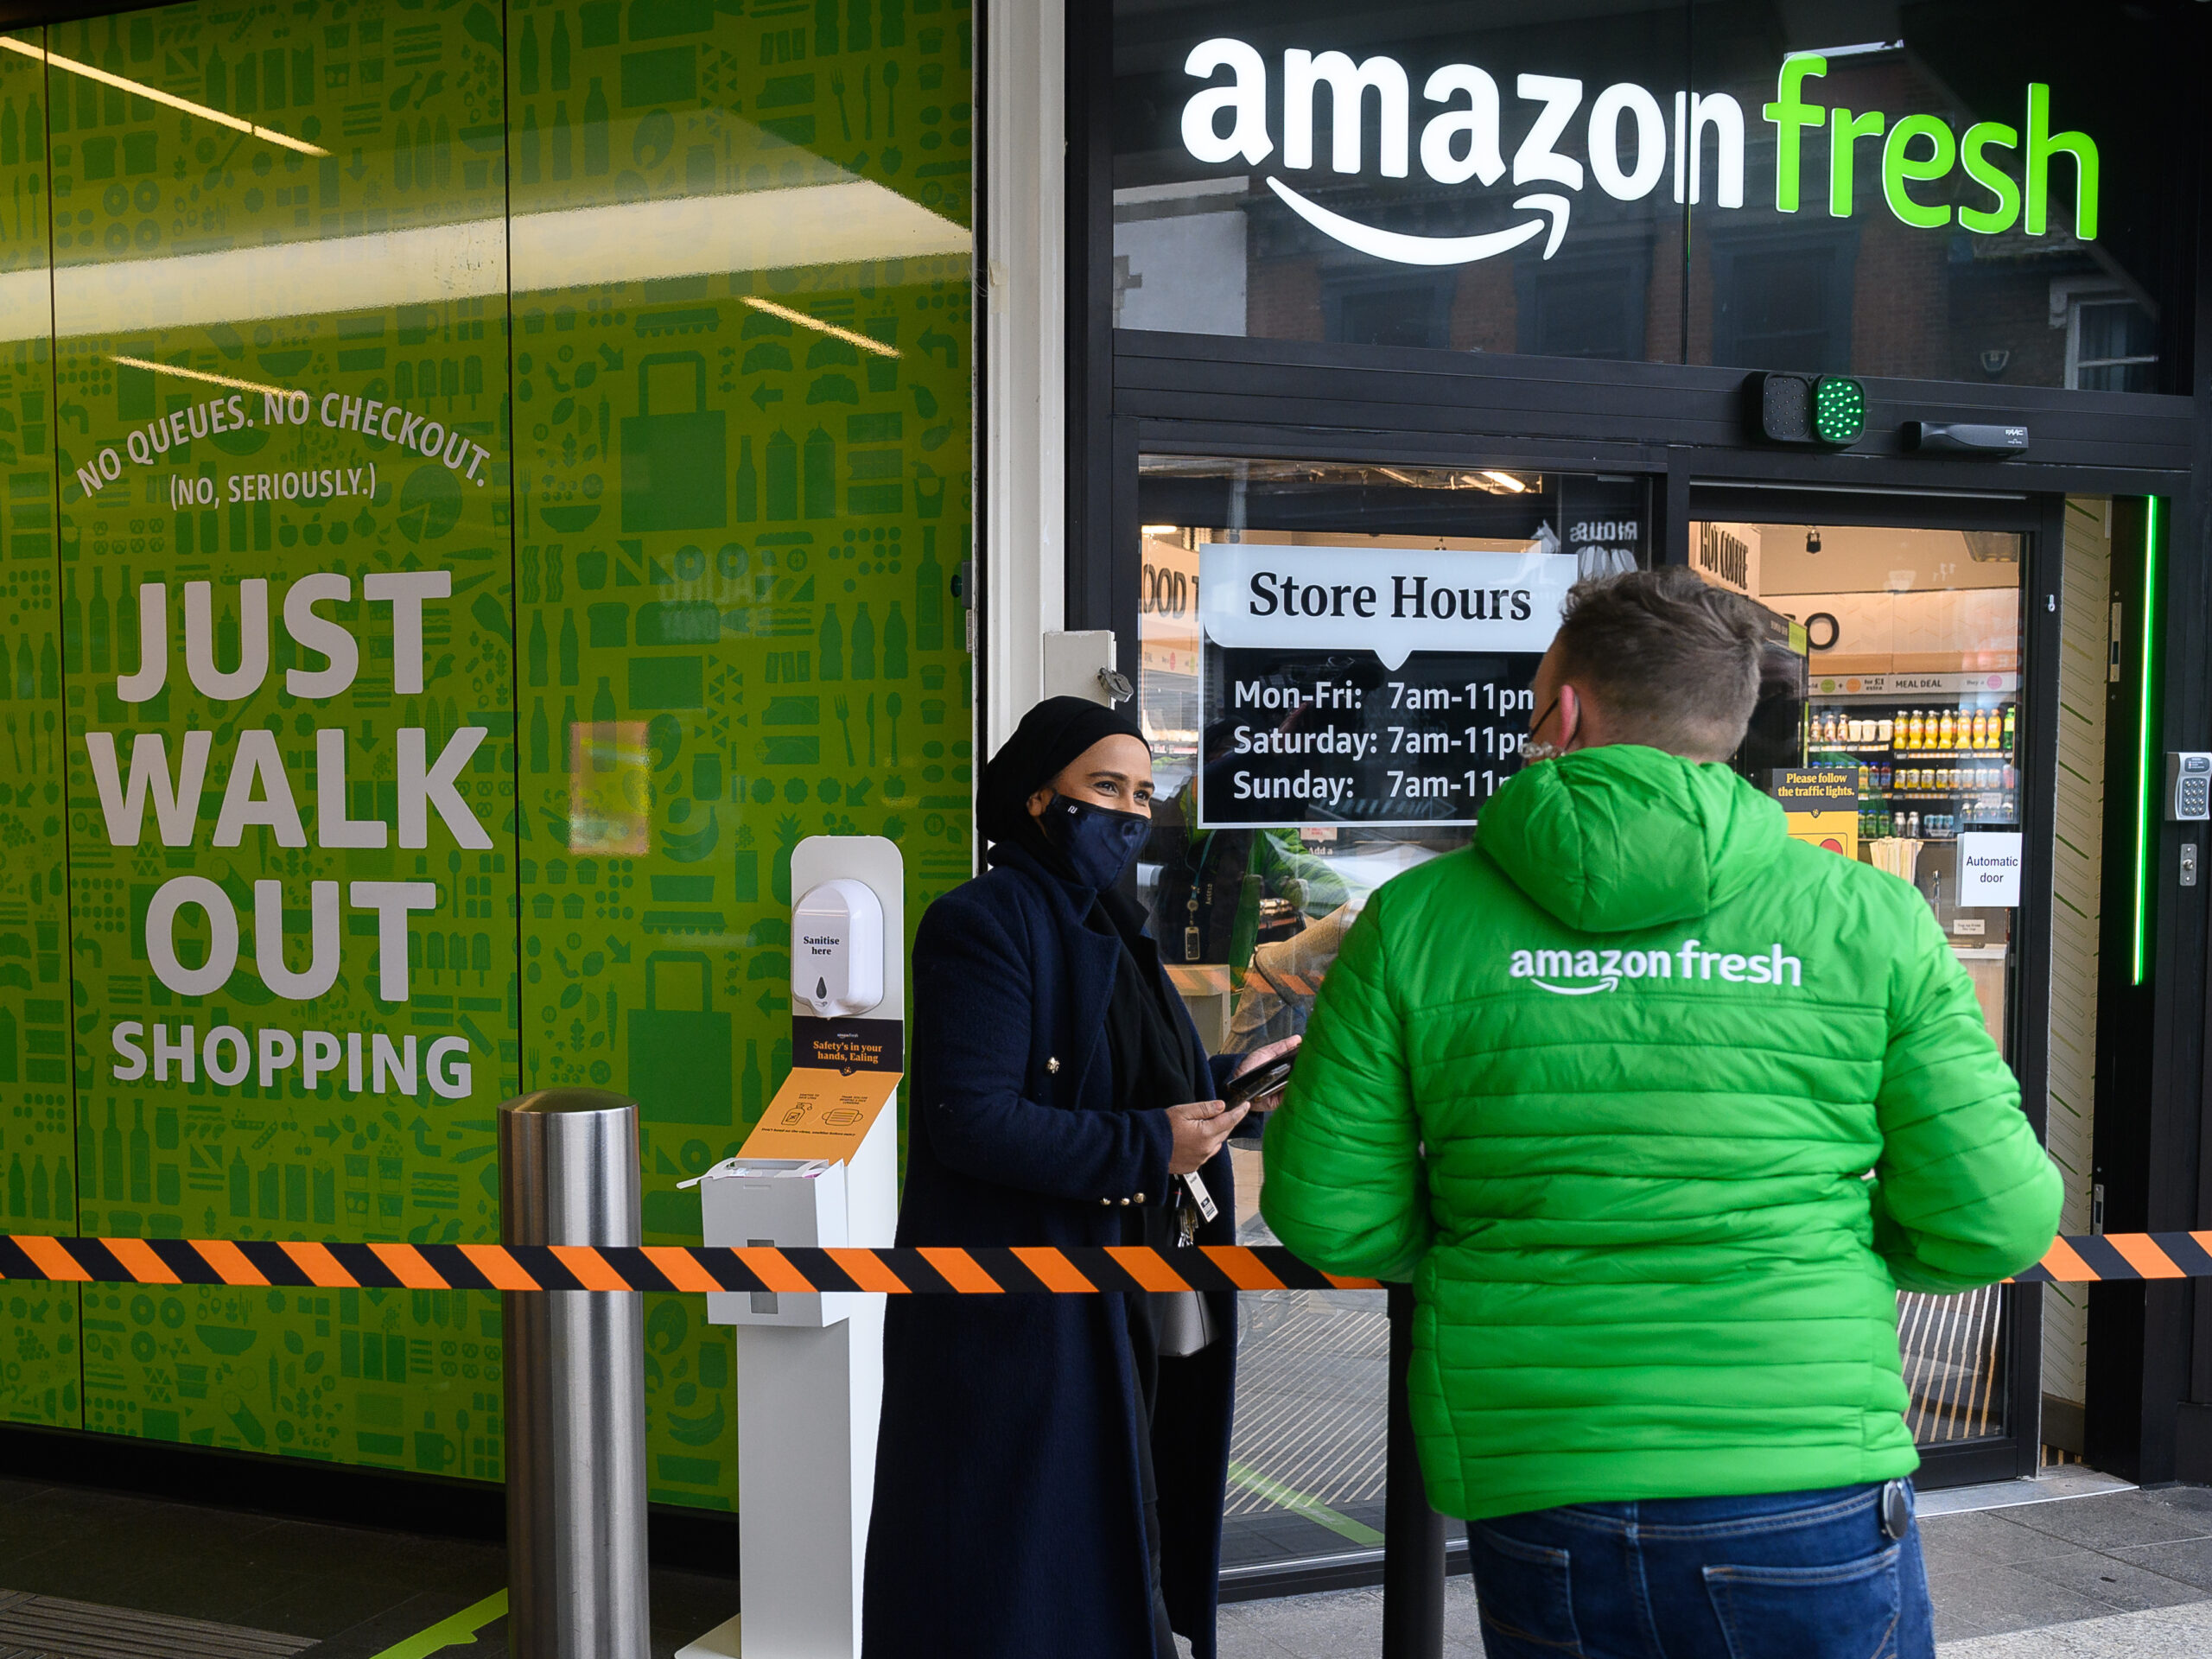 The first Amazon Fresh grocery store in London opened in 2021. The company is replacing its "Just Walk Out" technology at U.S. stores with smart shopping carts, but leaving it in the U.K.